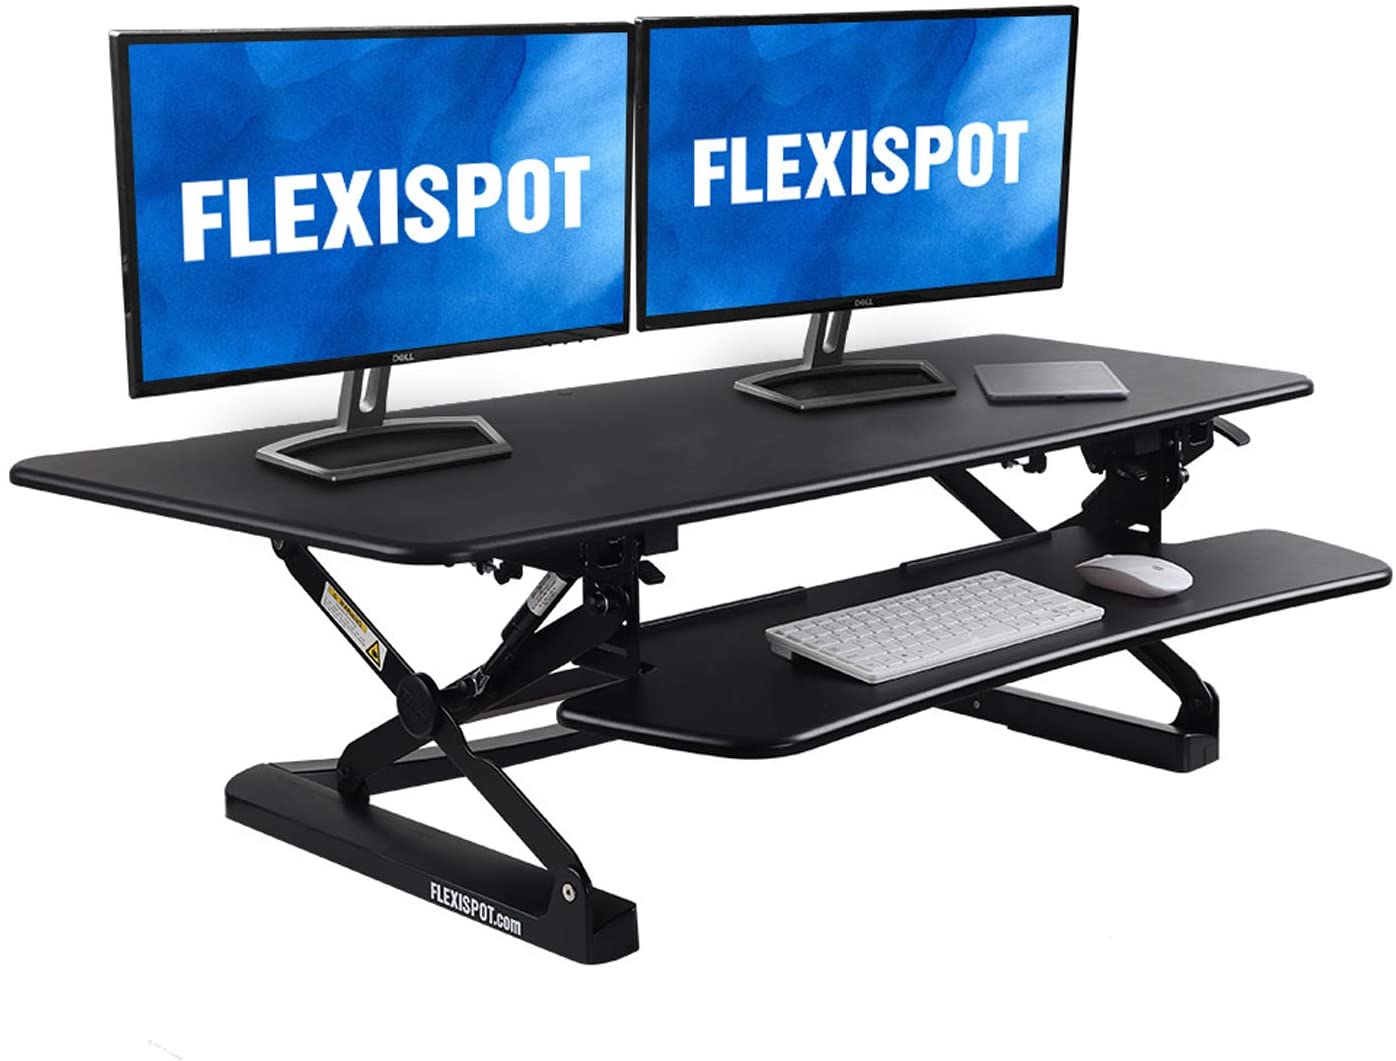 Adjustable Standing Desk perfect for dual comptur users as well.